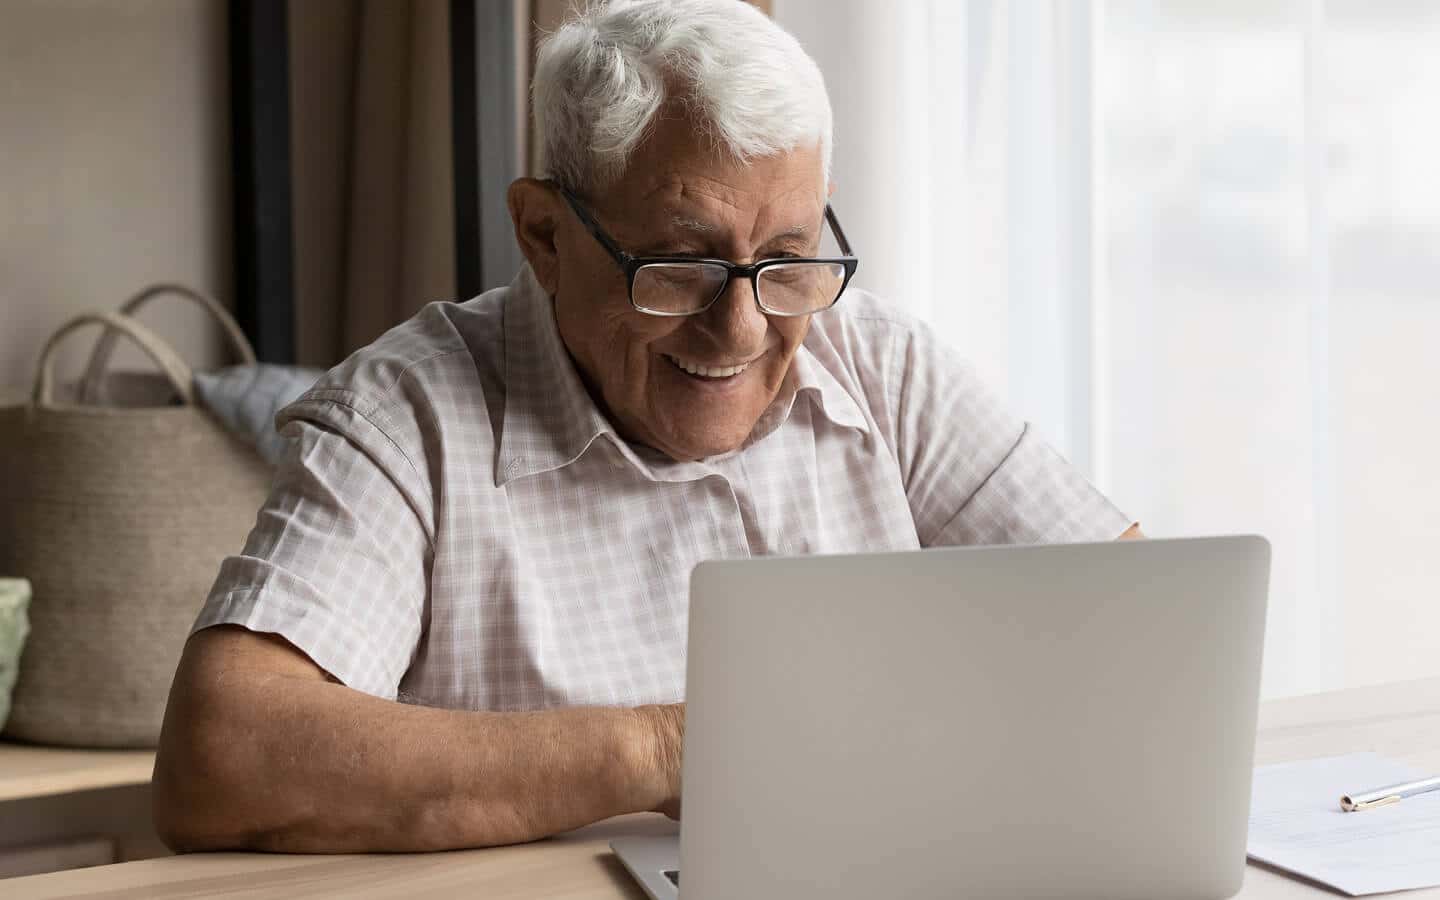 Senior man wearing glasses smiling and looking at a laptop computer